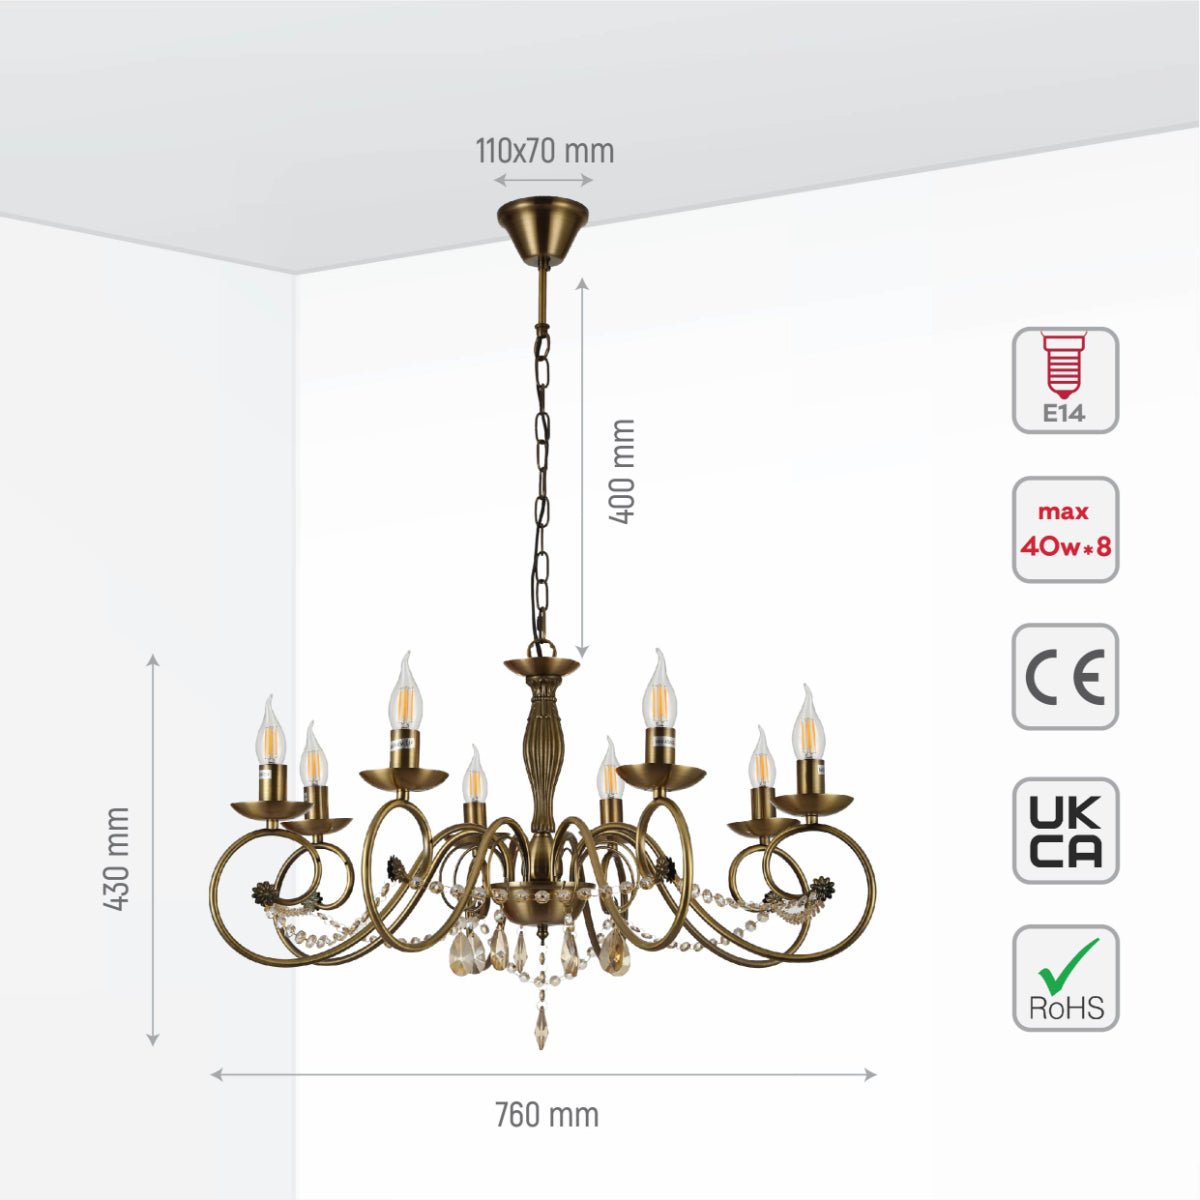 Size and specs of Antique Brass Finishing Metal Body French Candle Vintage Crystal Ceiling Light with E14 | TEKLED 152-179538